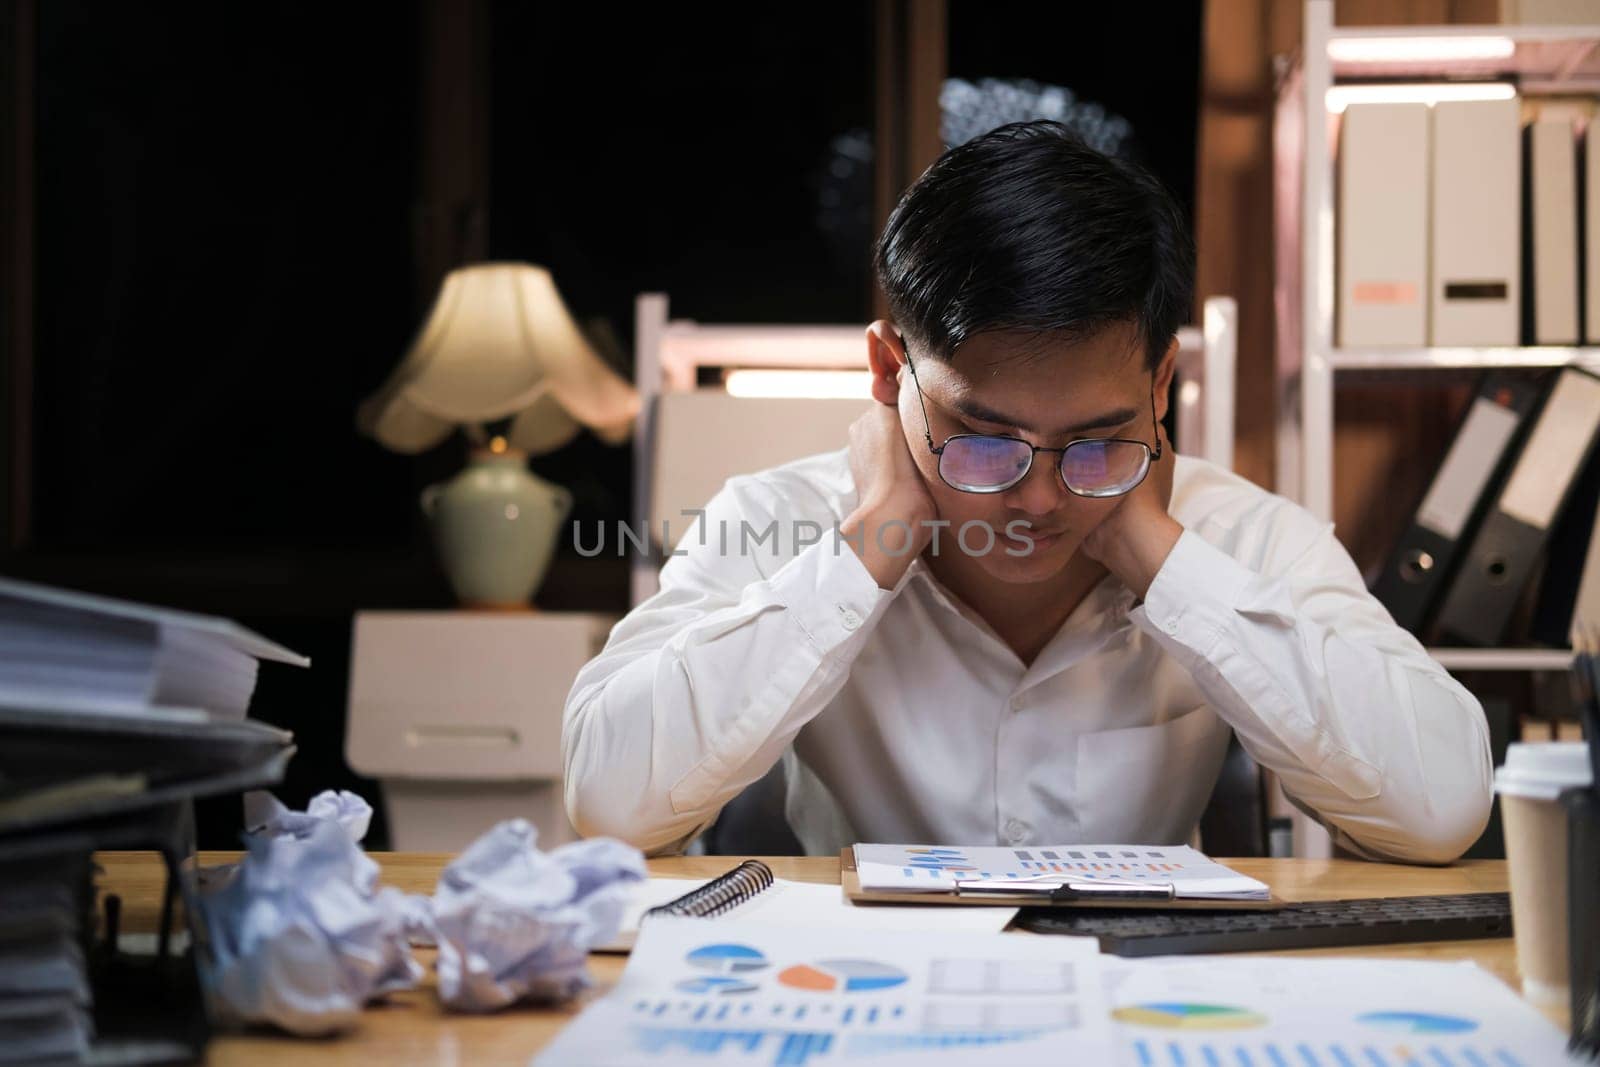 Asian man working late sitting on desk in office overtime at night. Business man feeling tired and stress for overload job.